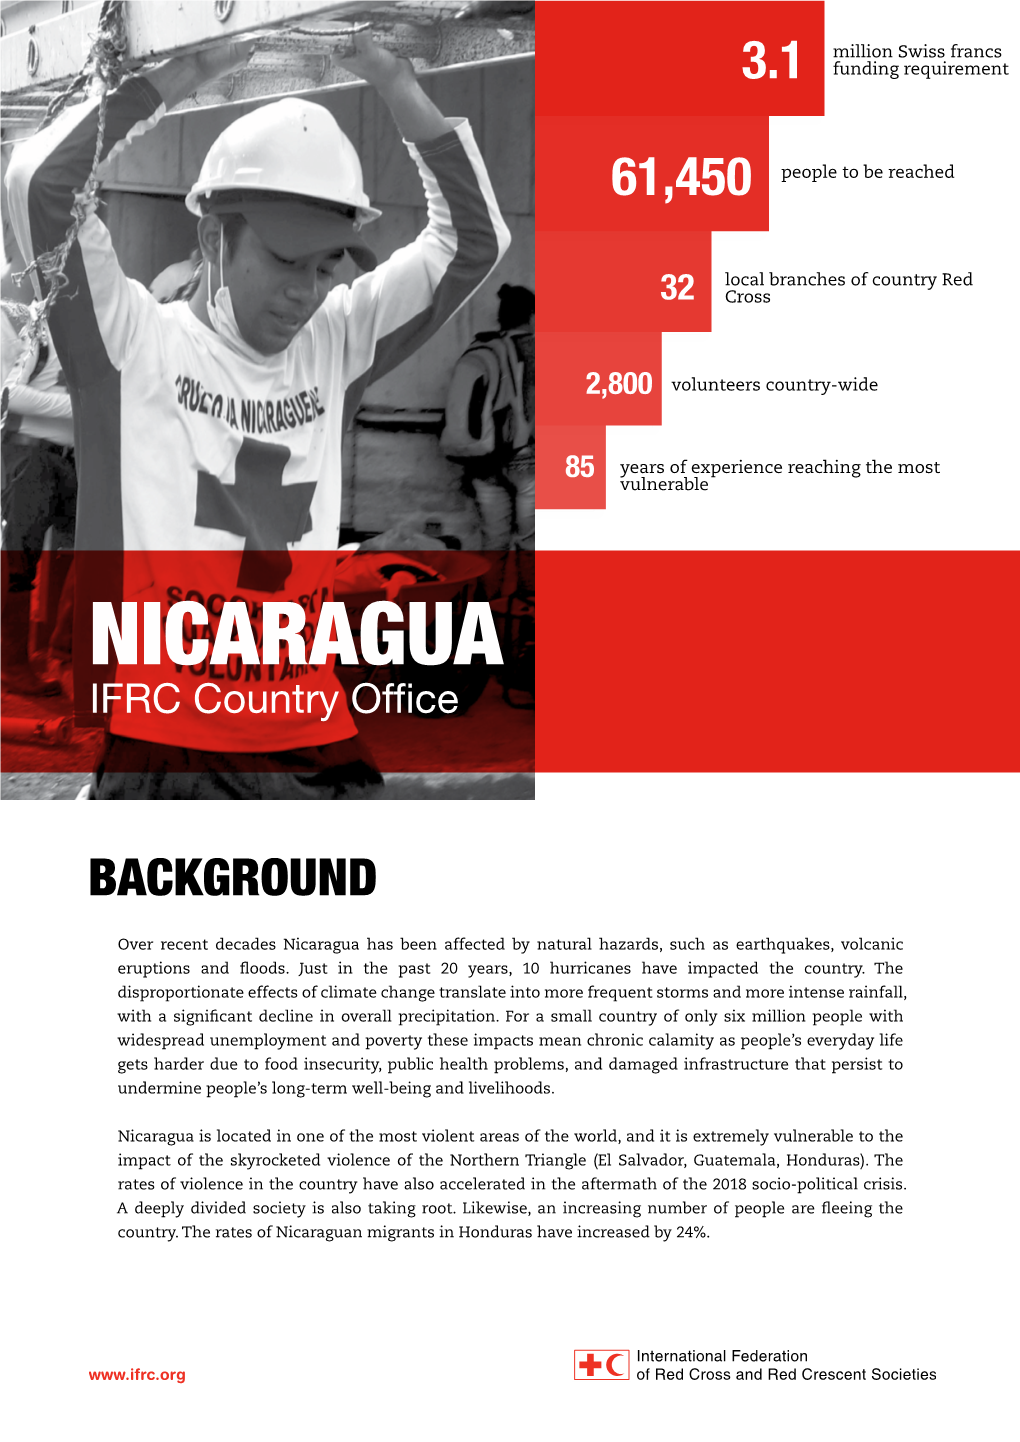 NICARAGUA IFRC Country Office